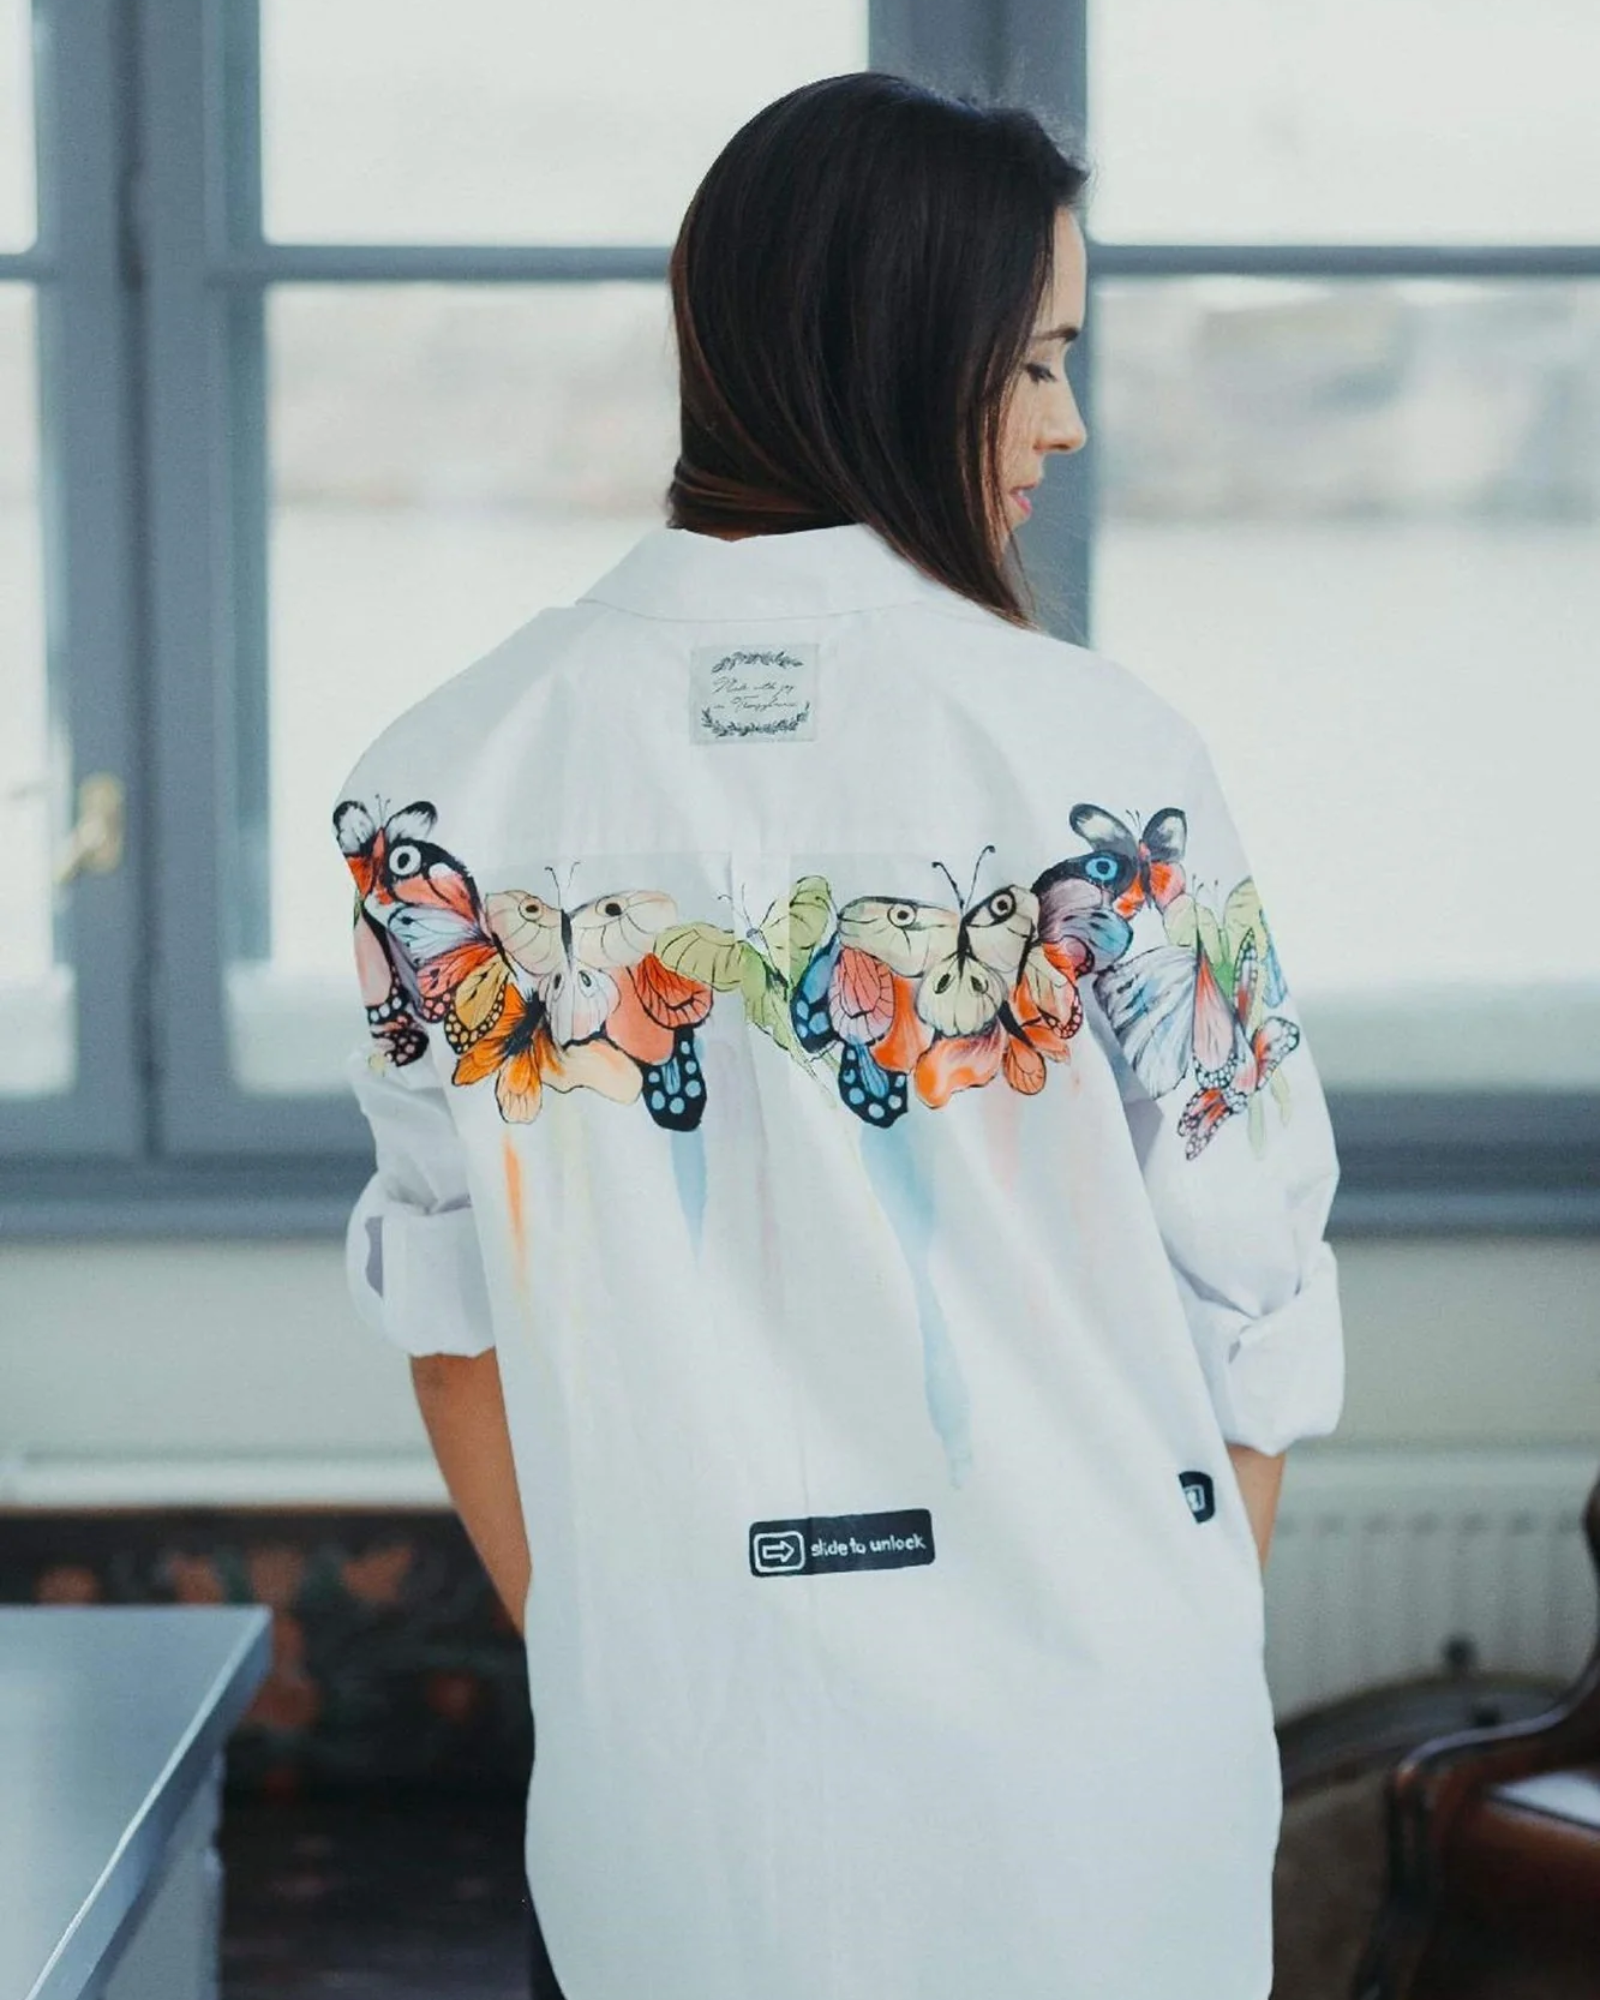 Oversized personalized shirt with butterflies "Butterfly effect"